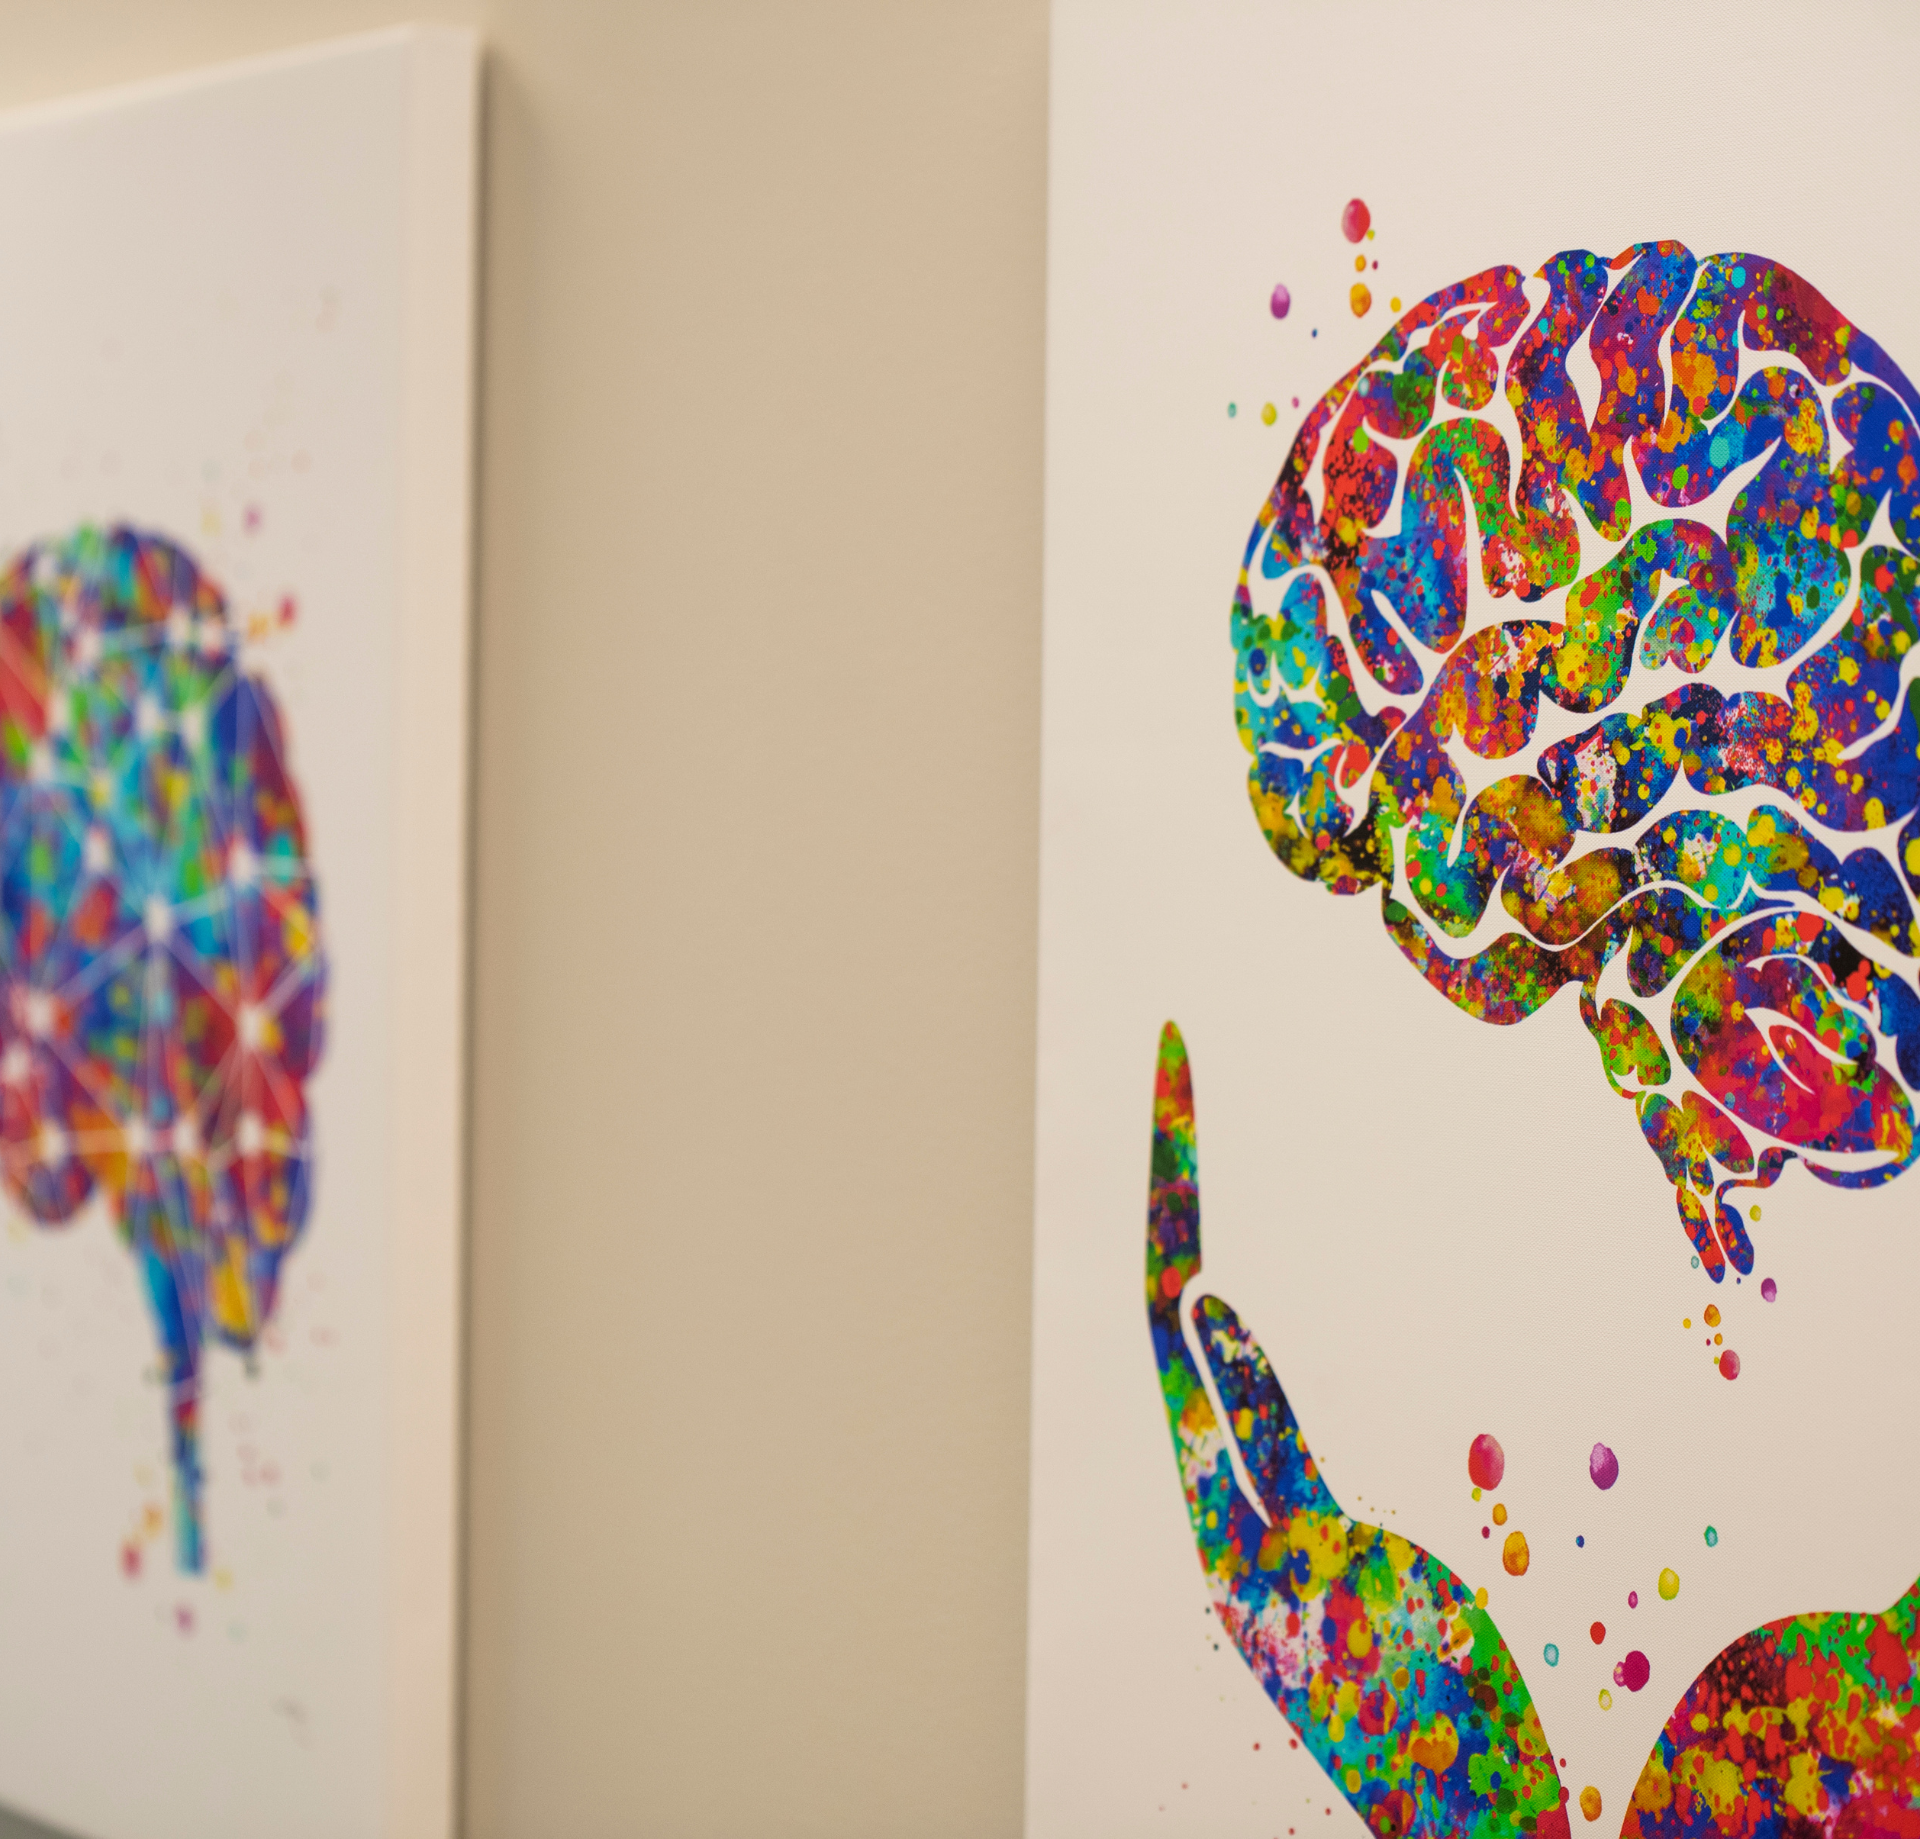 two paintings of a brain and a hand are hanging on a wall .